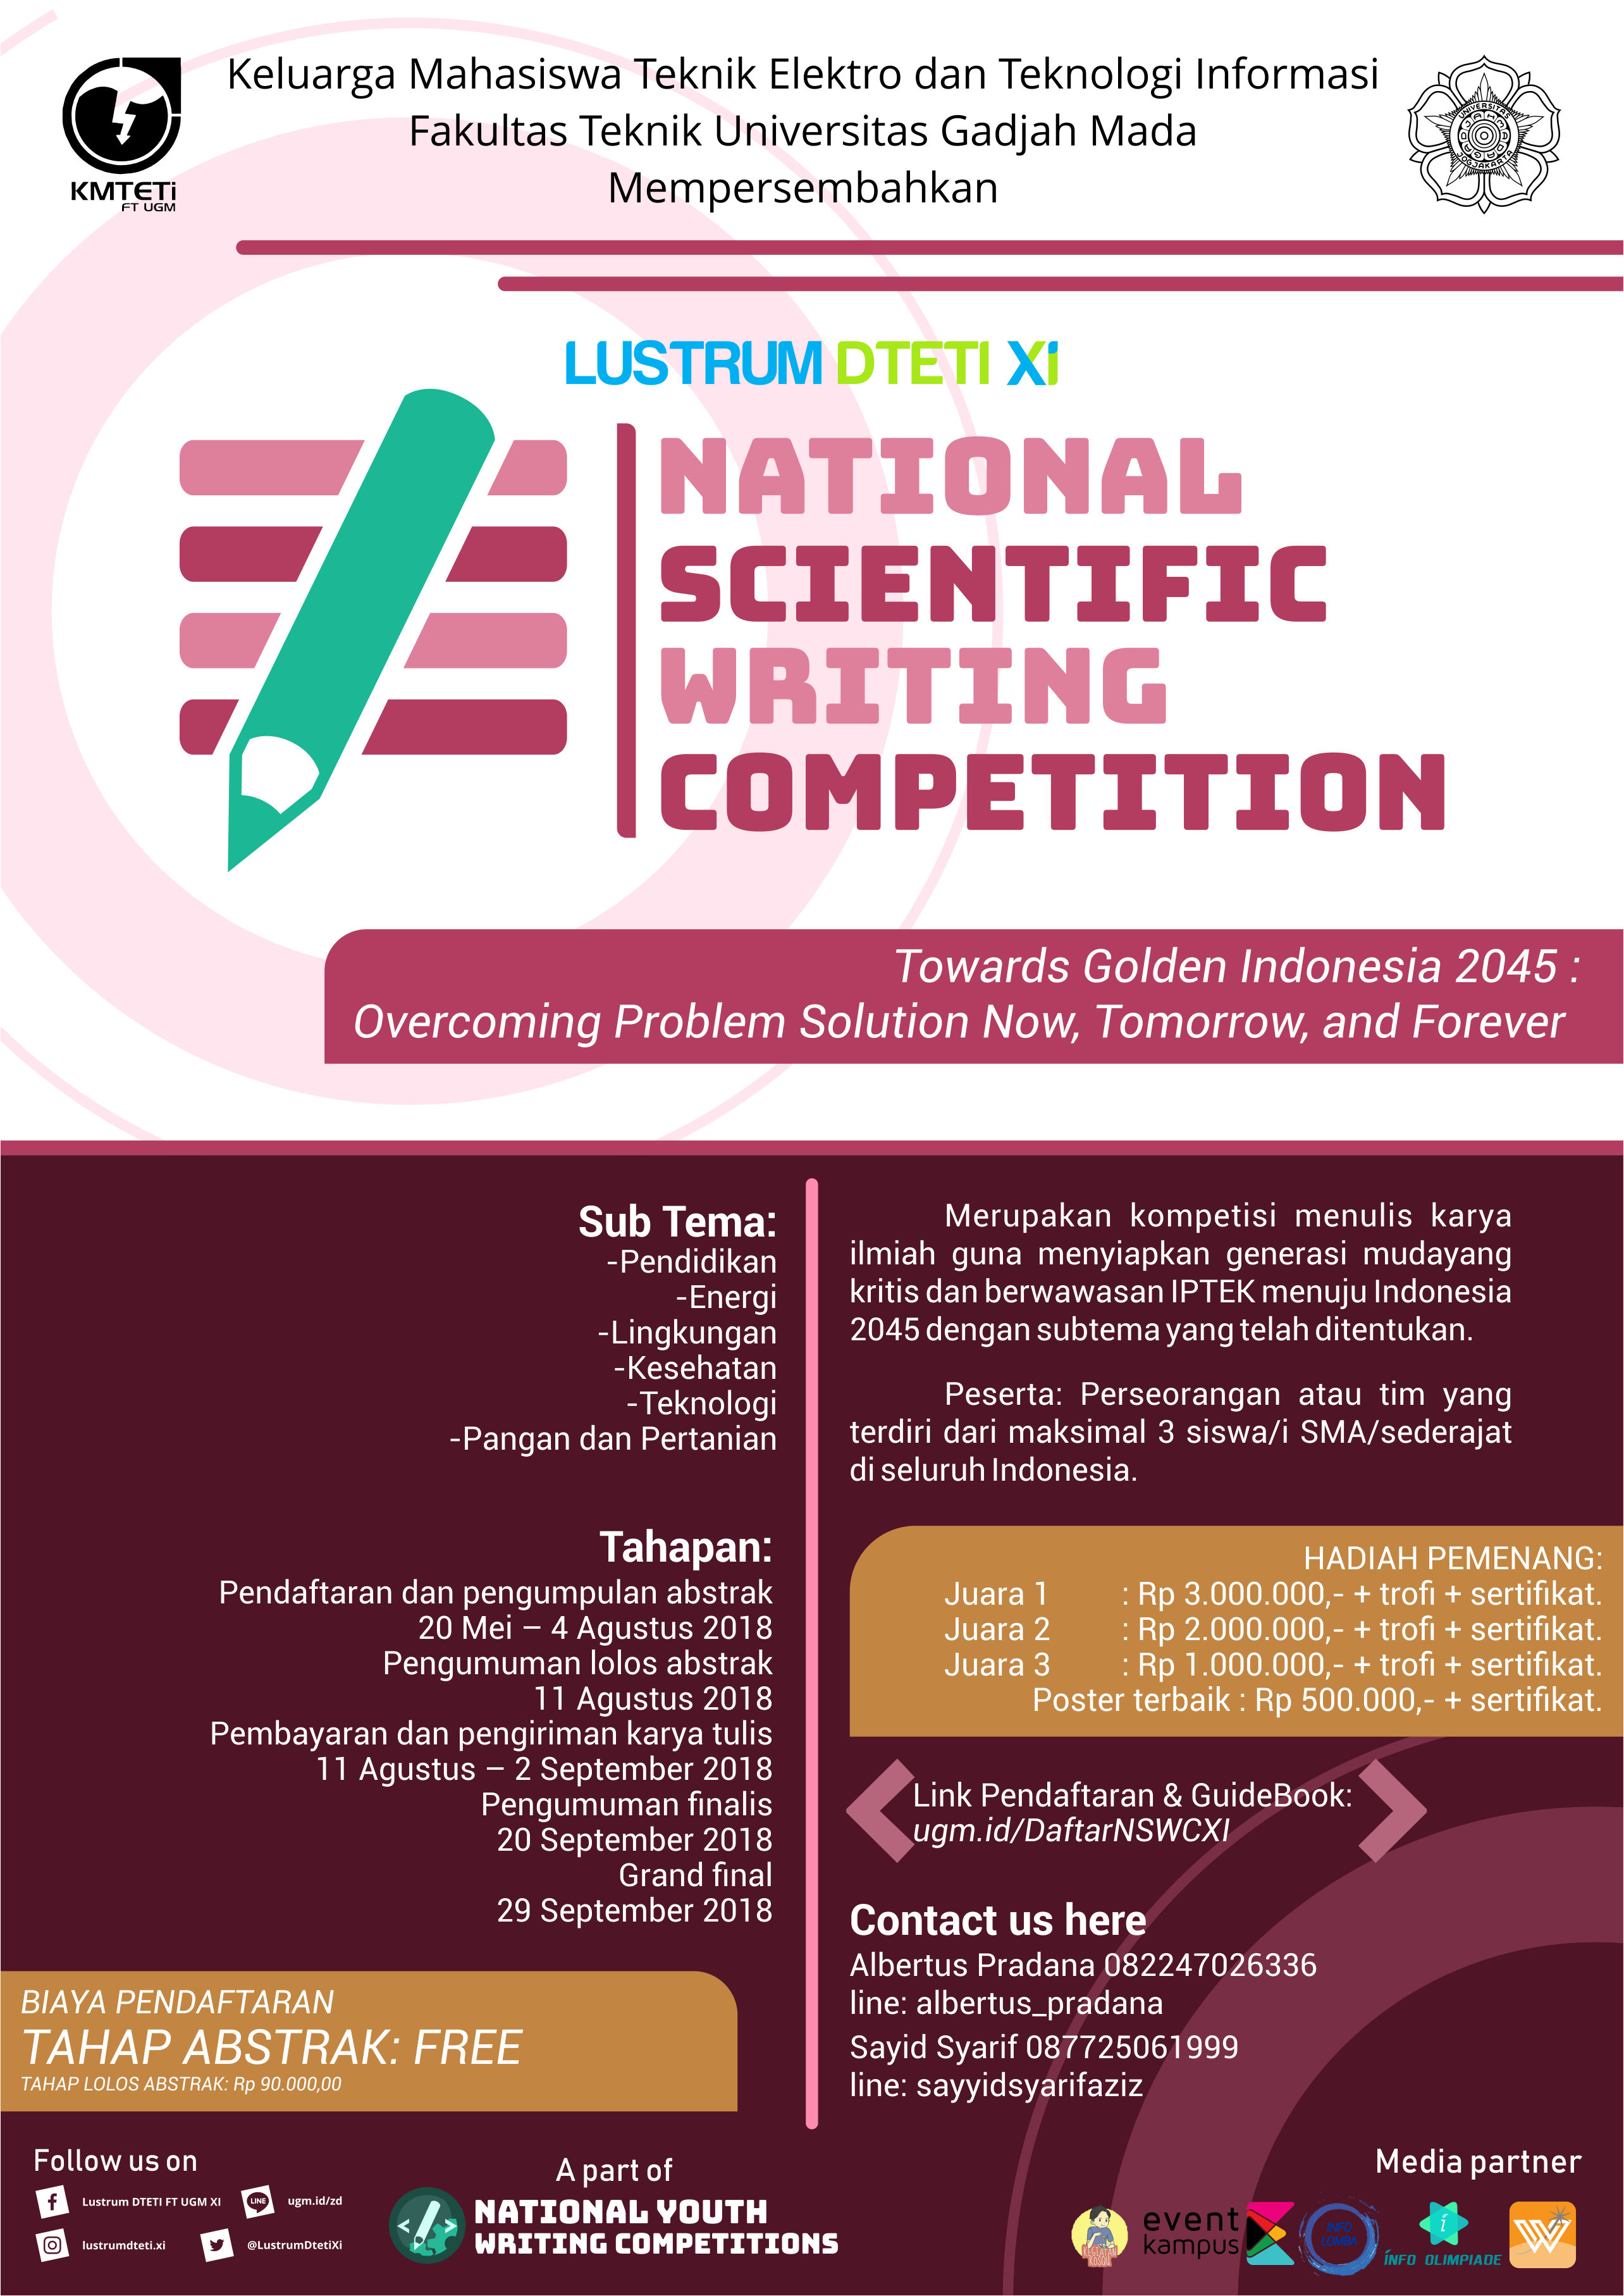 Poster National Scientific Writing Competition Lustrum DTETI XI